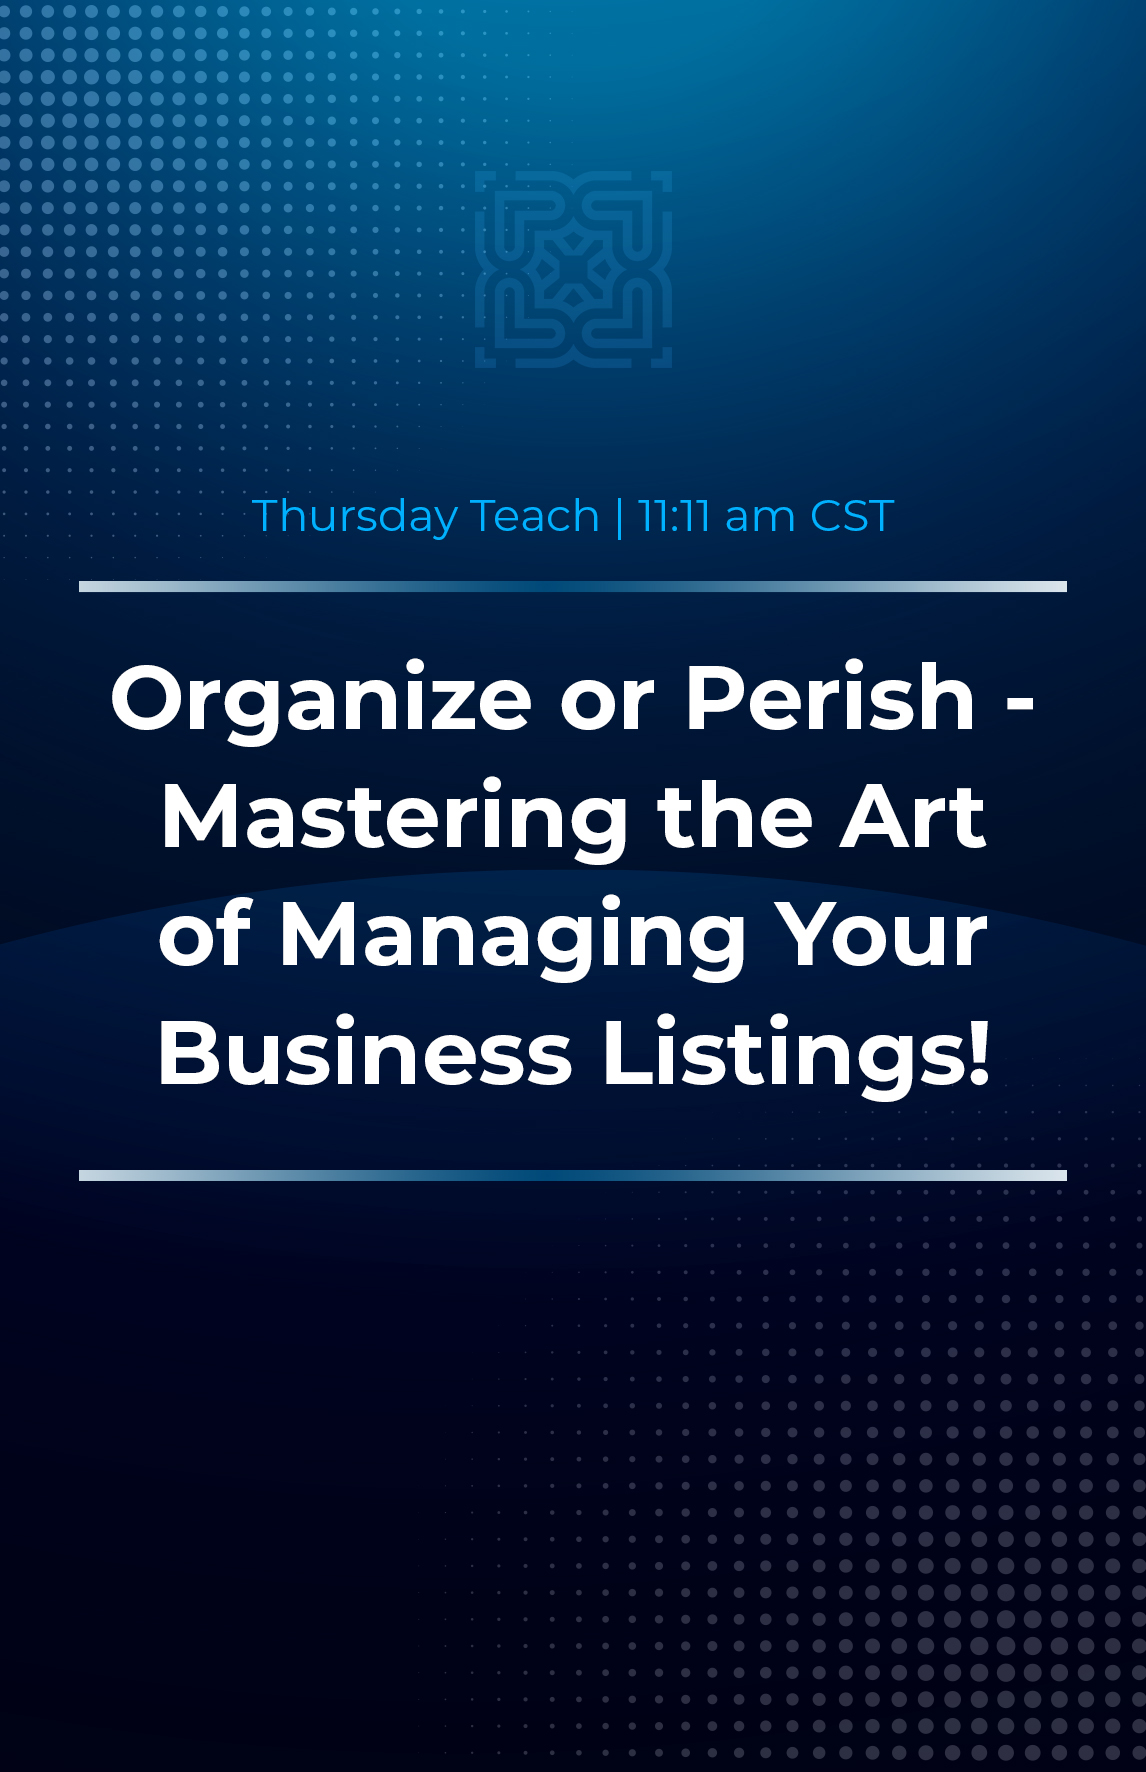 Organize or Perish - Mastering the Art of Managing Your Business Listings